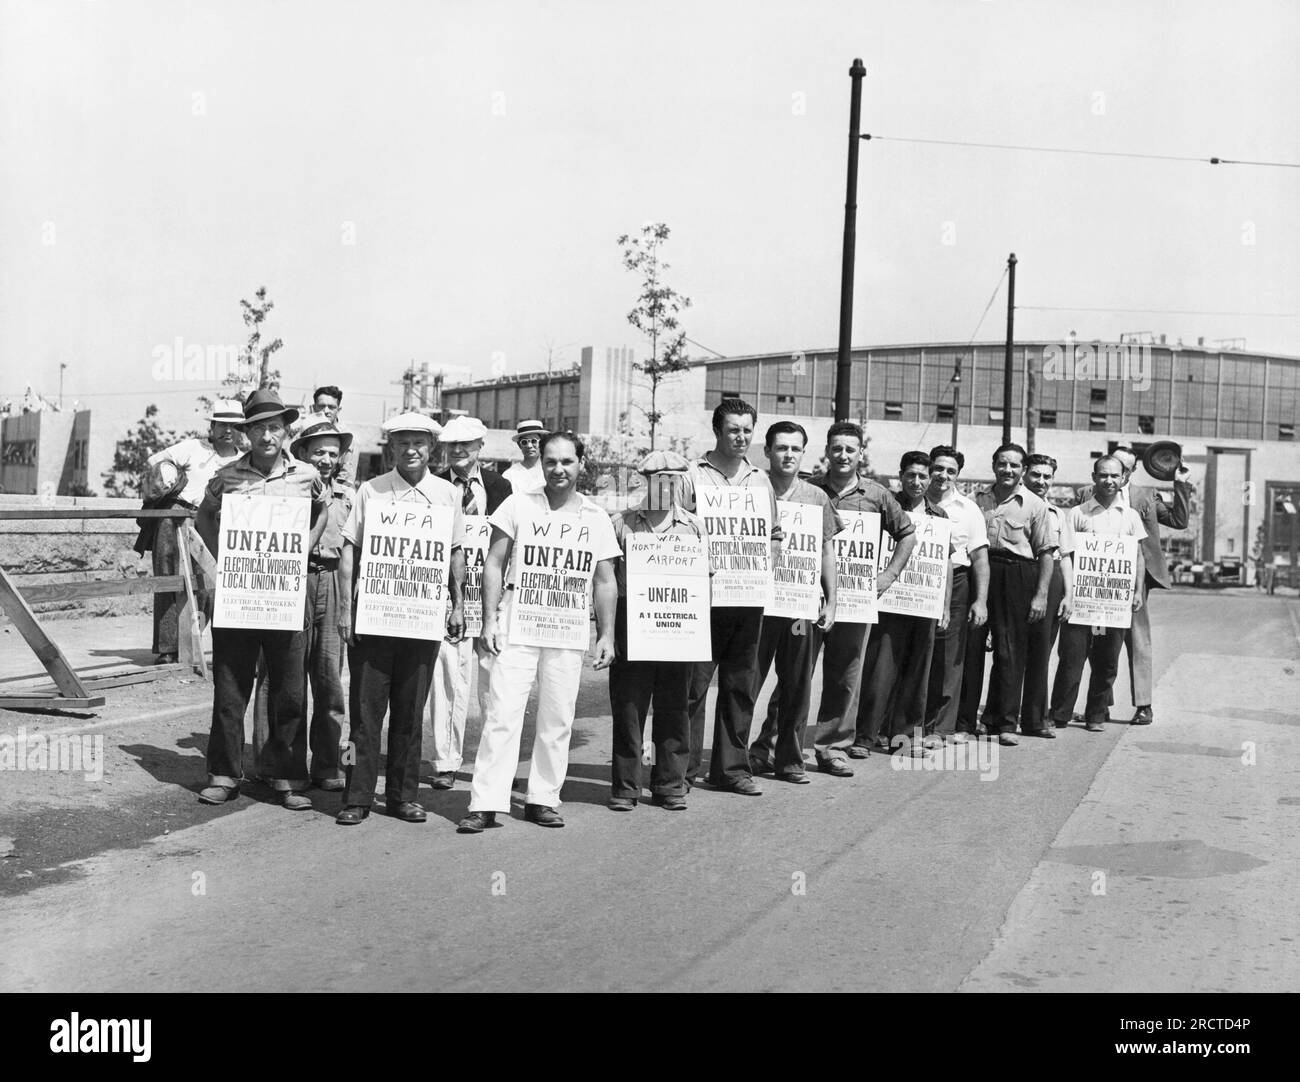 New York, New York:  July 20, 1939 Some of the WPA strikers at the North Beach Airport in Queens protesting the mandatory dismissals in the ranks of the Works Progress Administration. Stock Photo